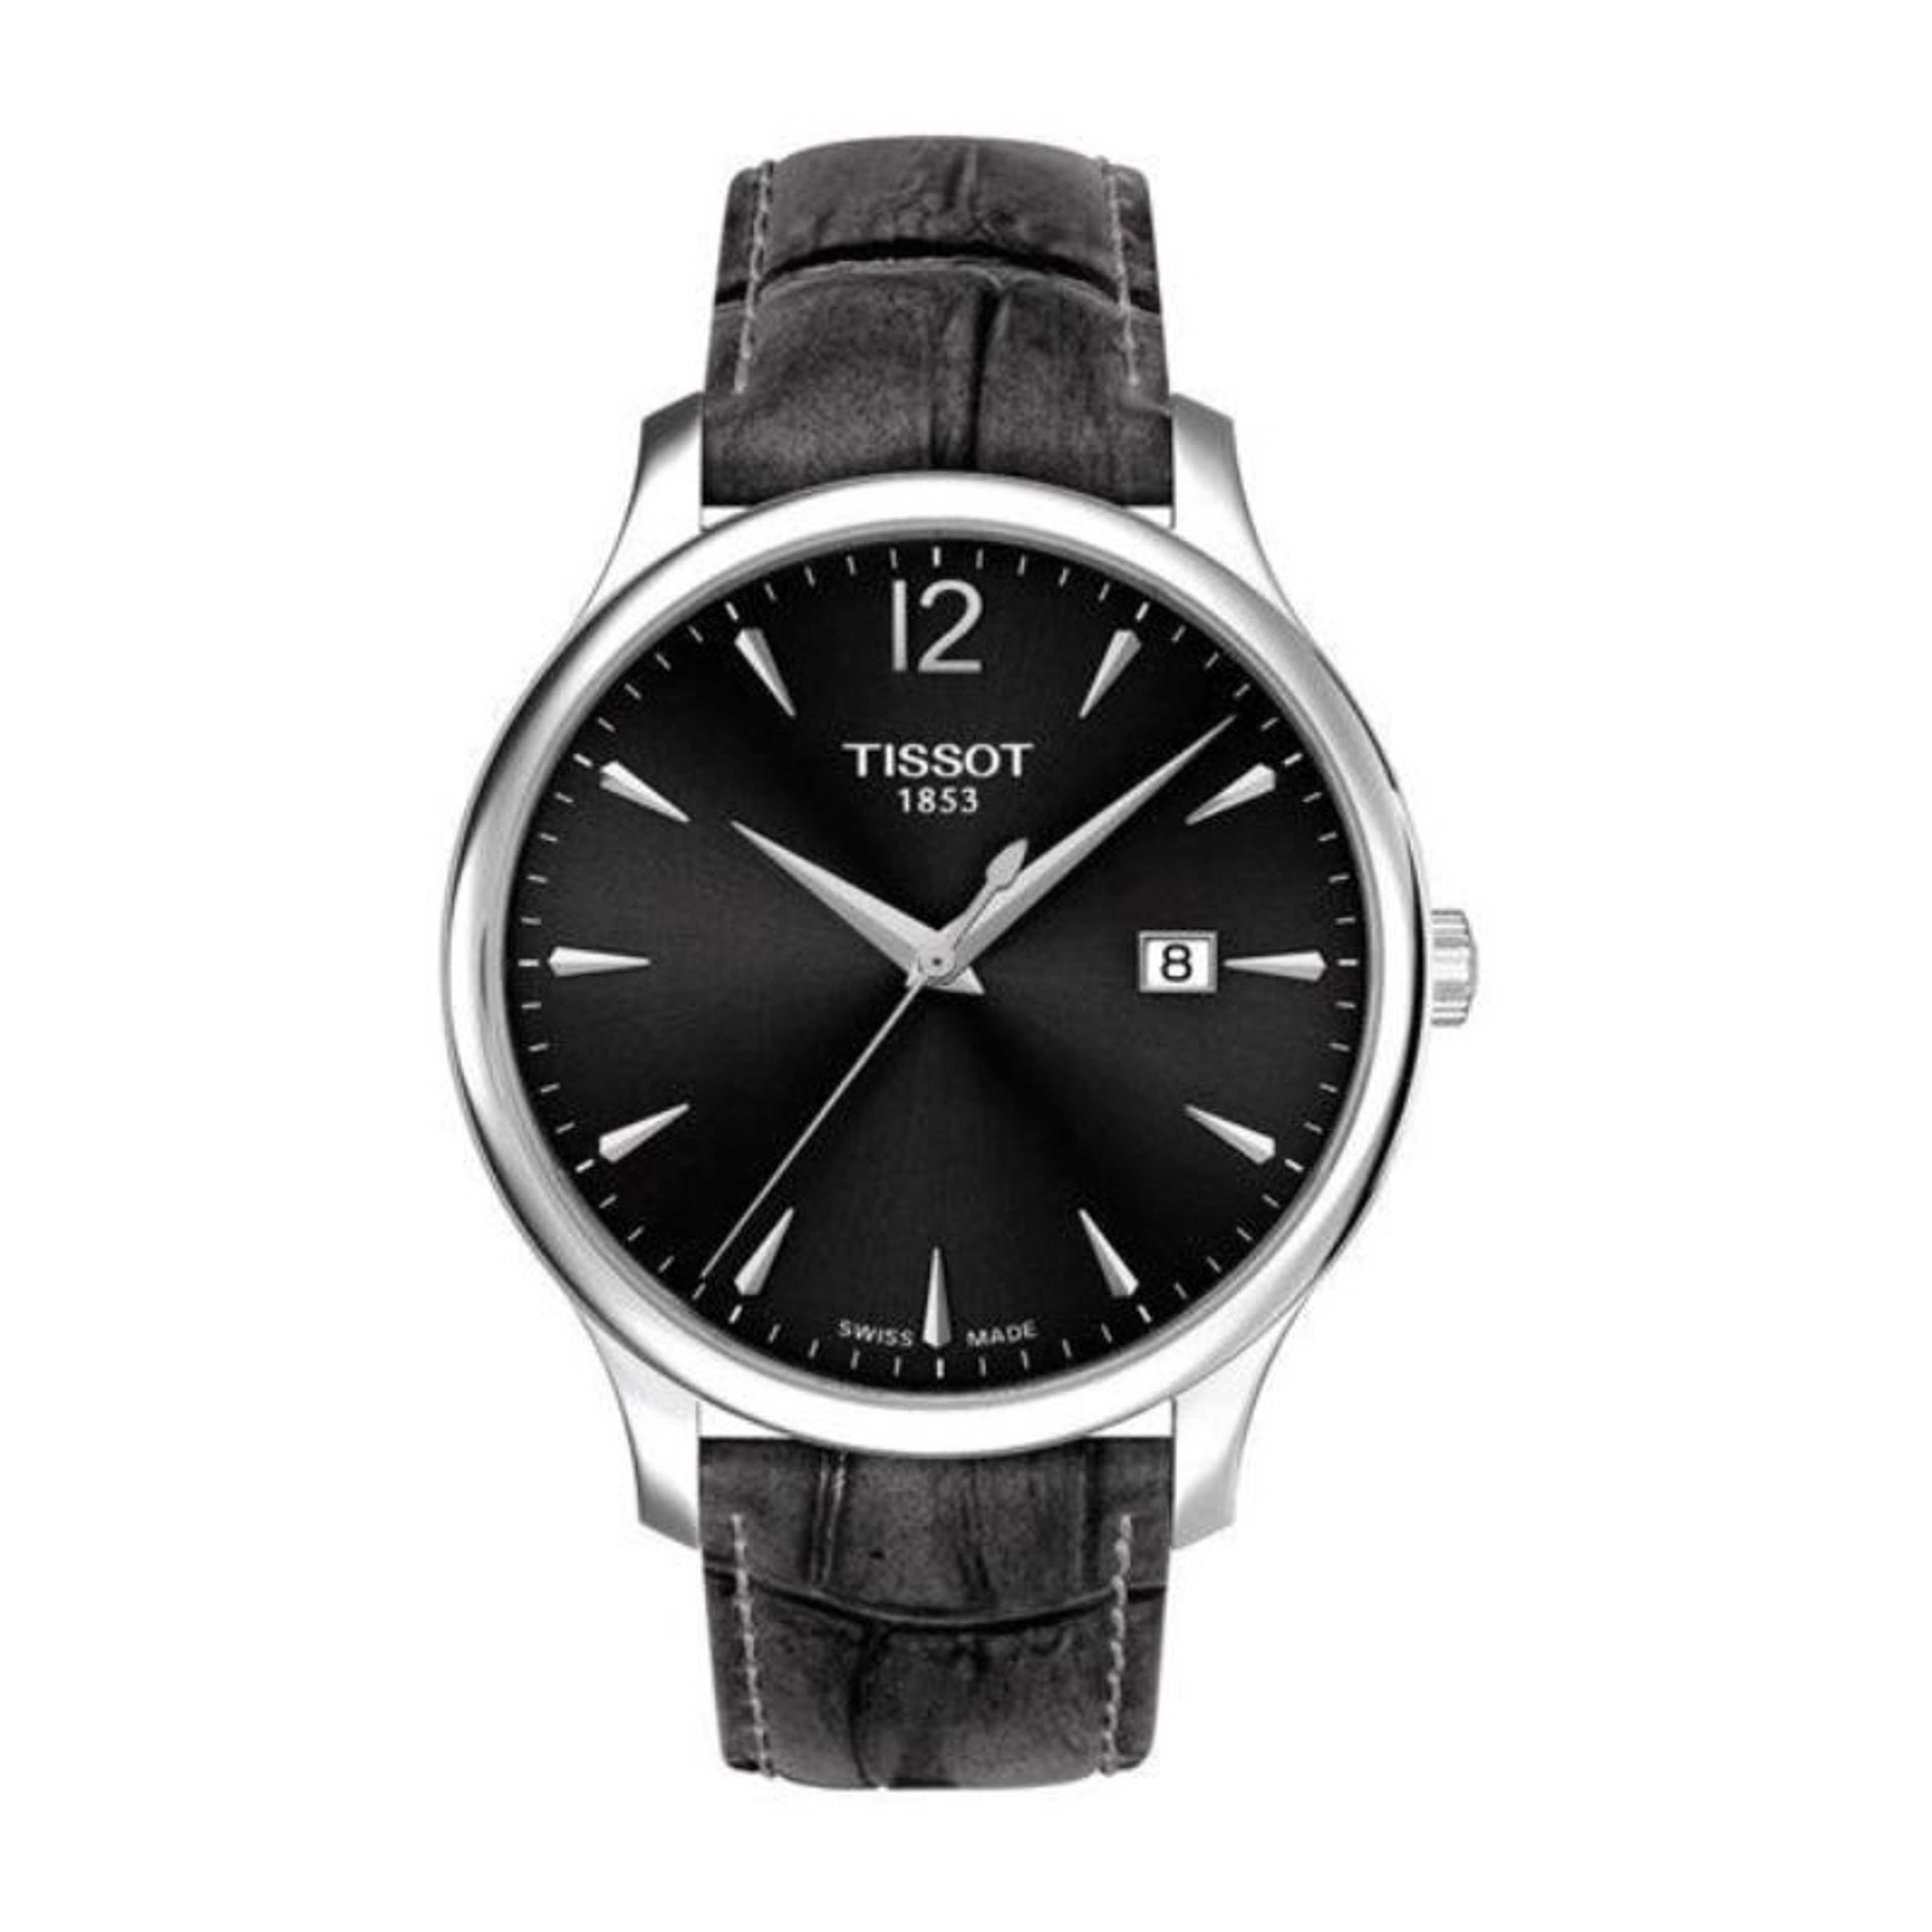 Tissot Tradition Gent's Watch T0636101608700